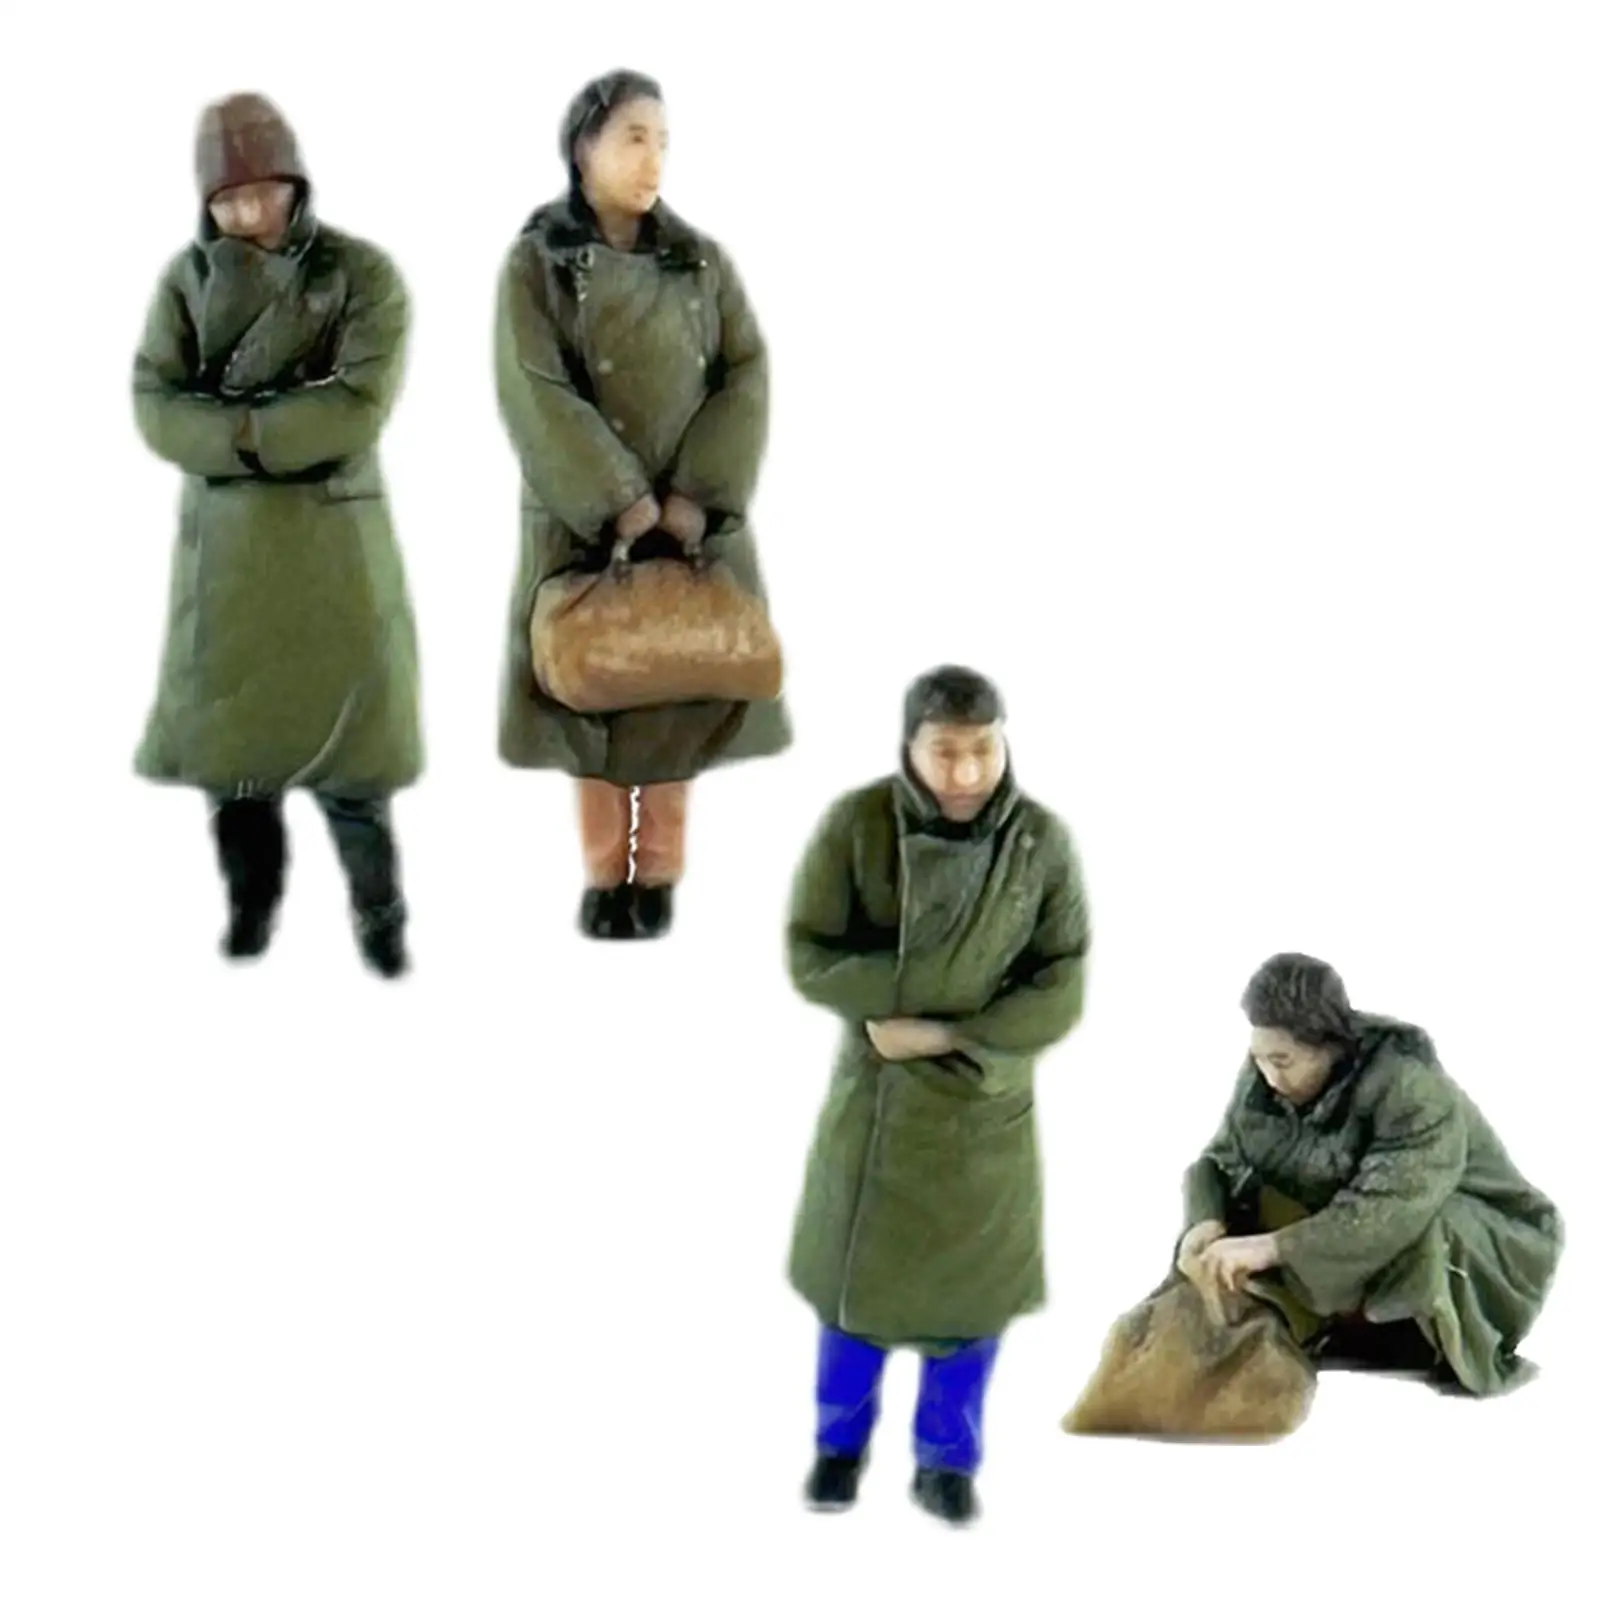 1:64 Wearing Green Coat Figures Model Trains People Figures Diorama Action Figurines for Miniature Scene Dollhouse Accessories